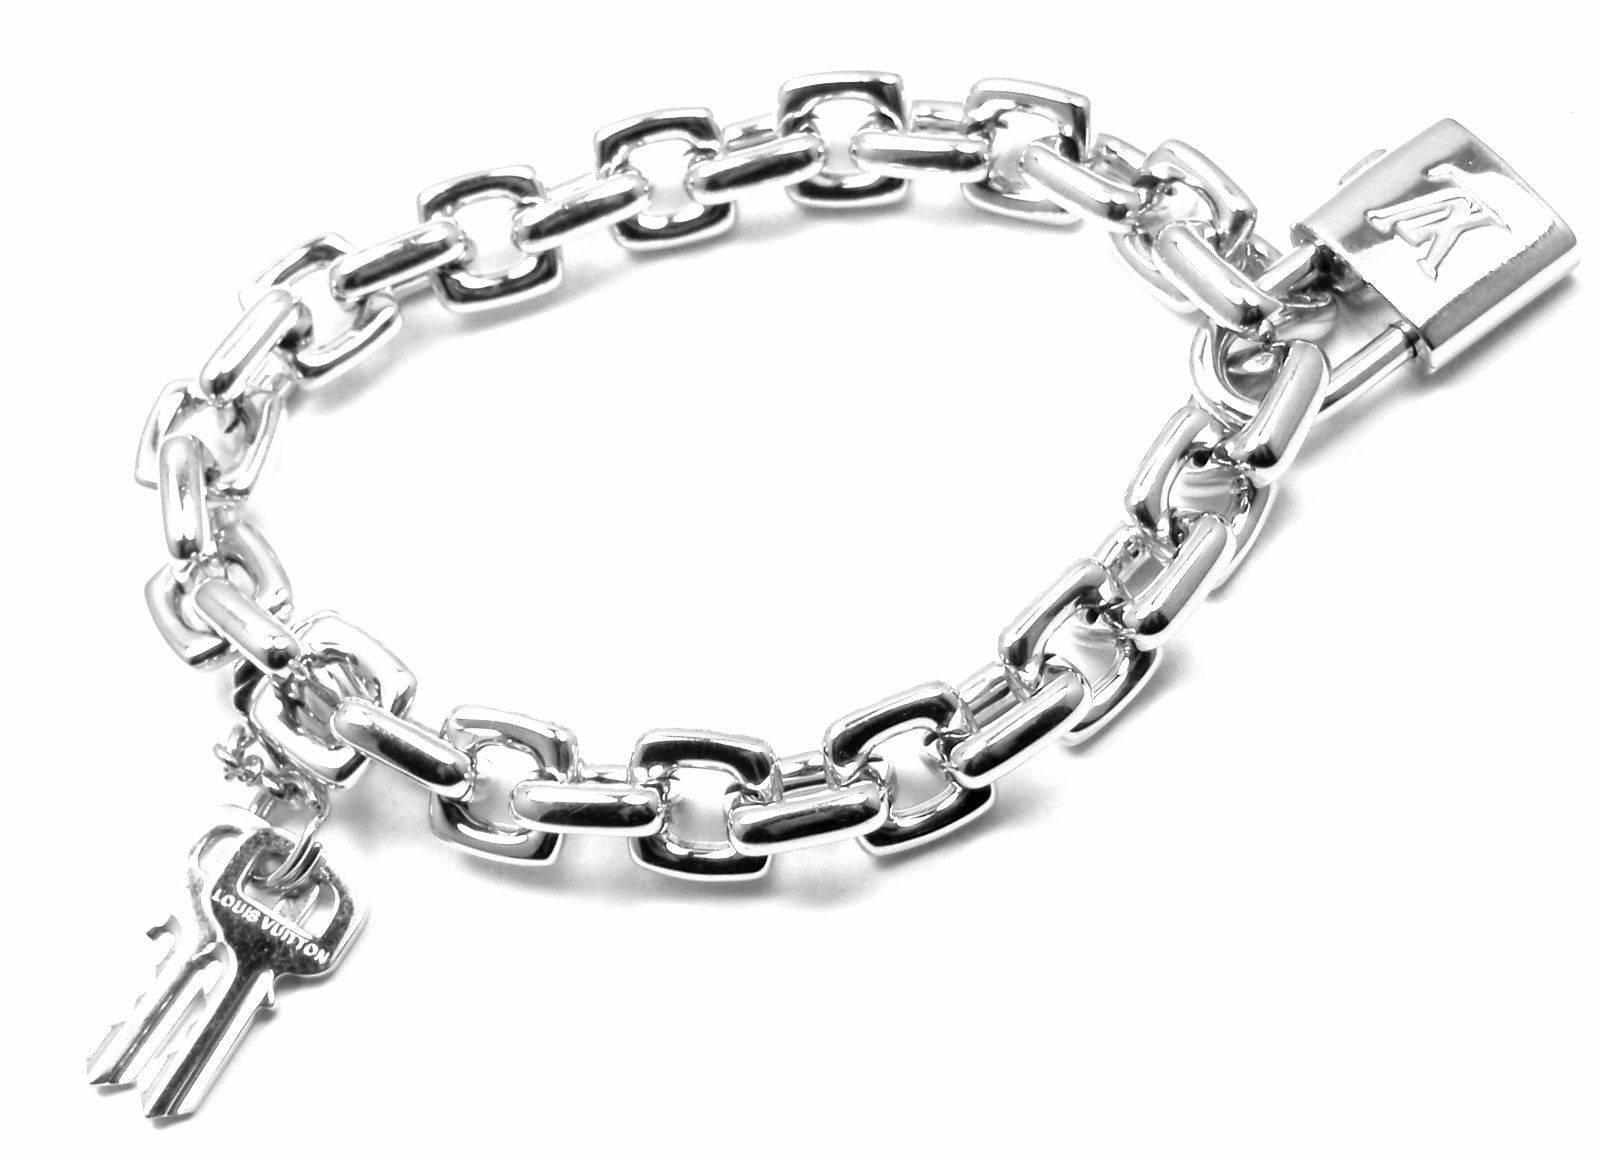 18k White Gold Charm Large Link Bracelet With Padlock And Keys Charm By Louis Vuitton.


Details:
Length: 8